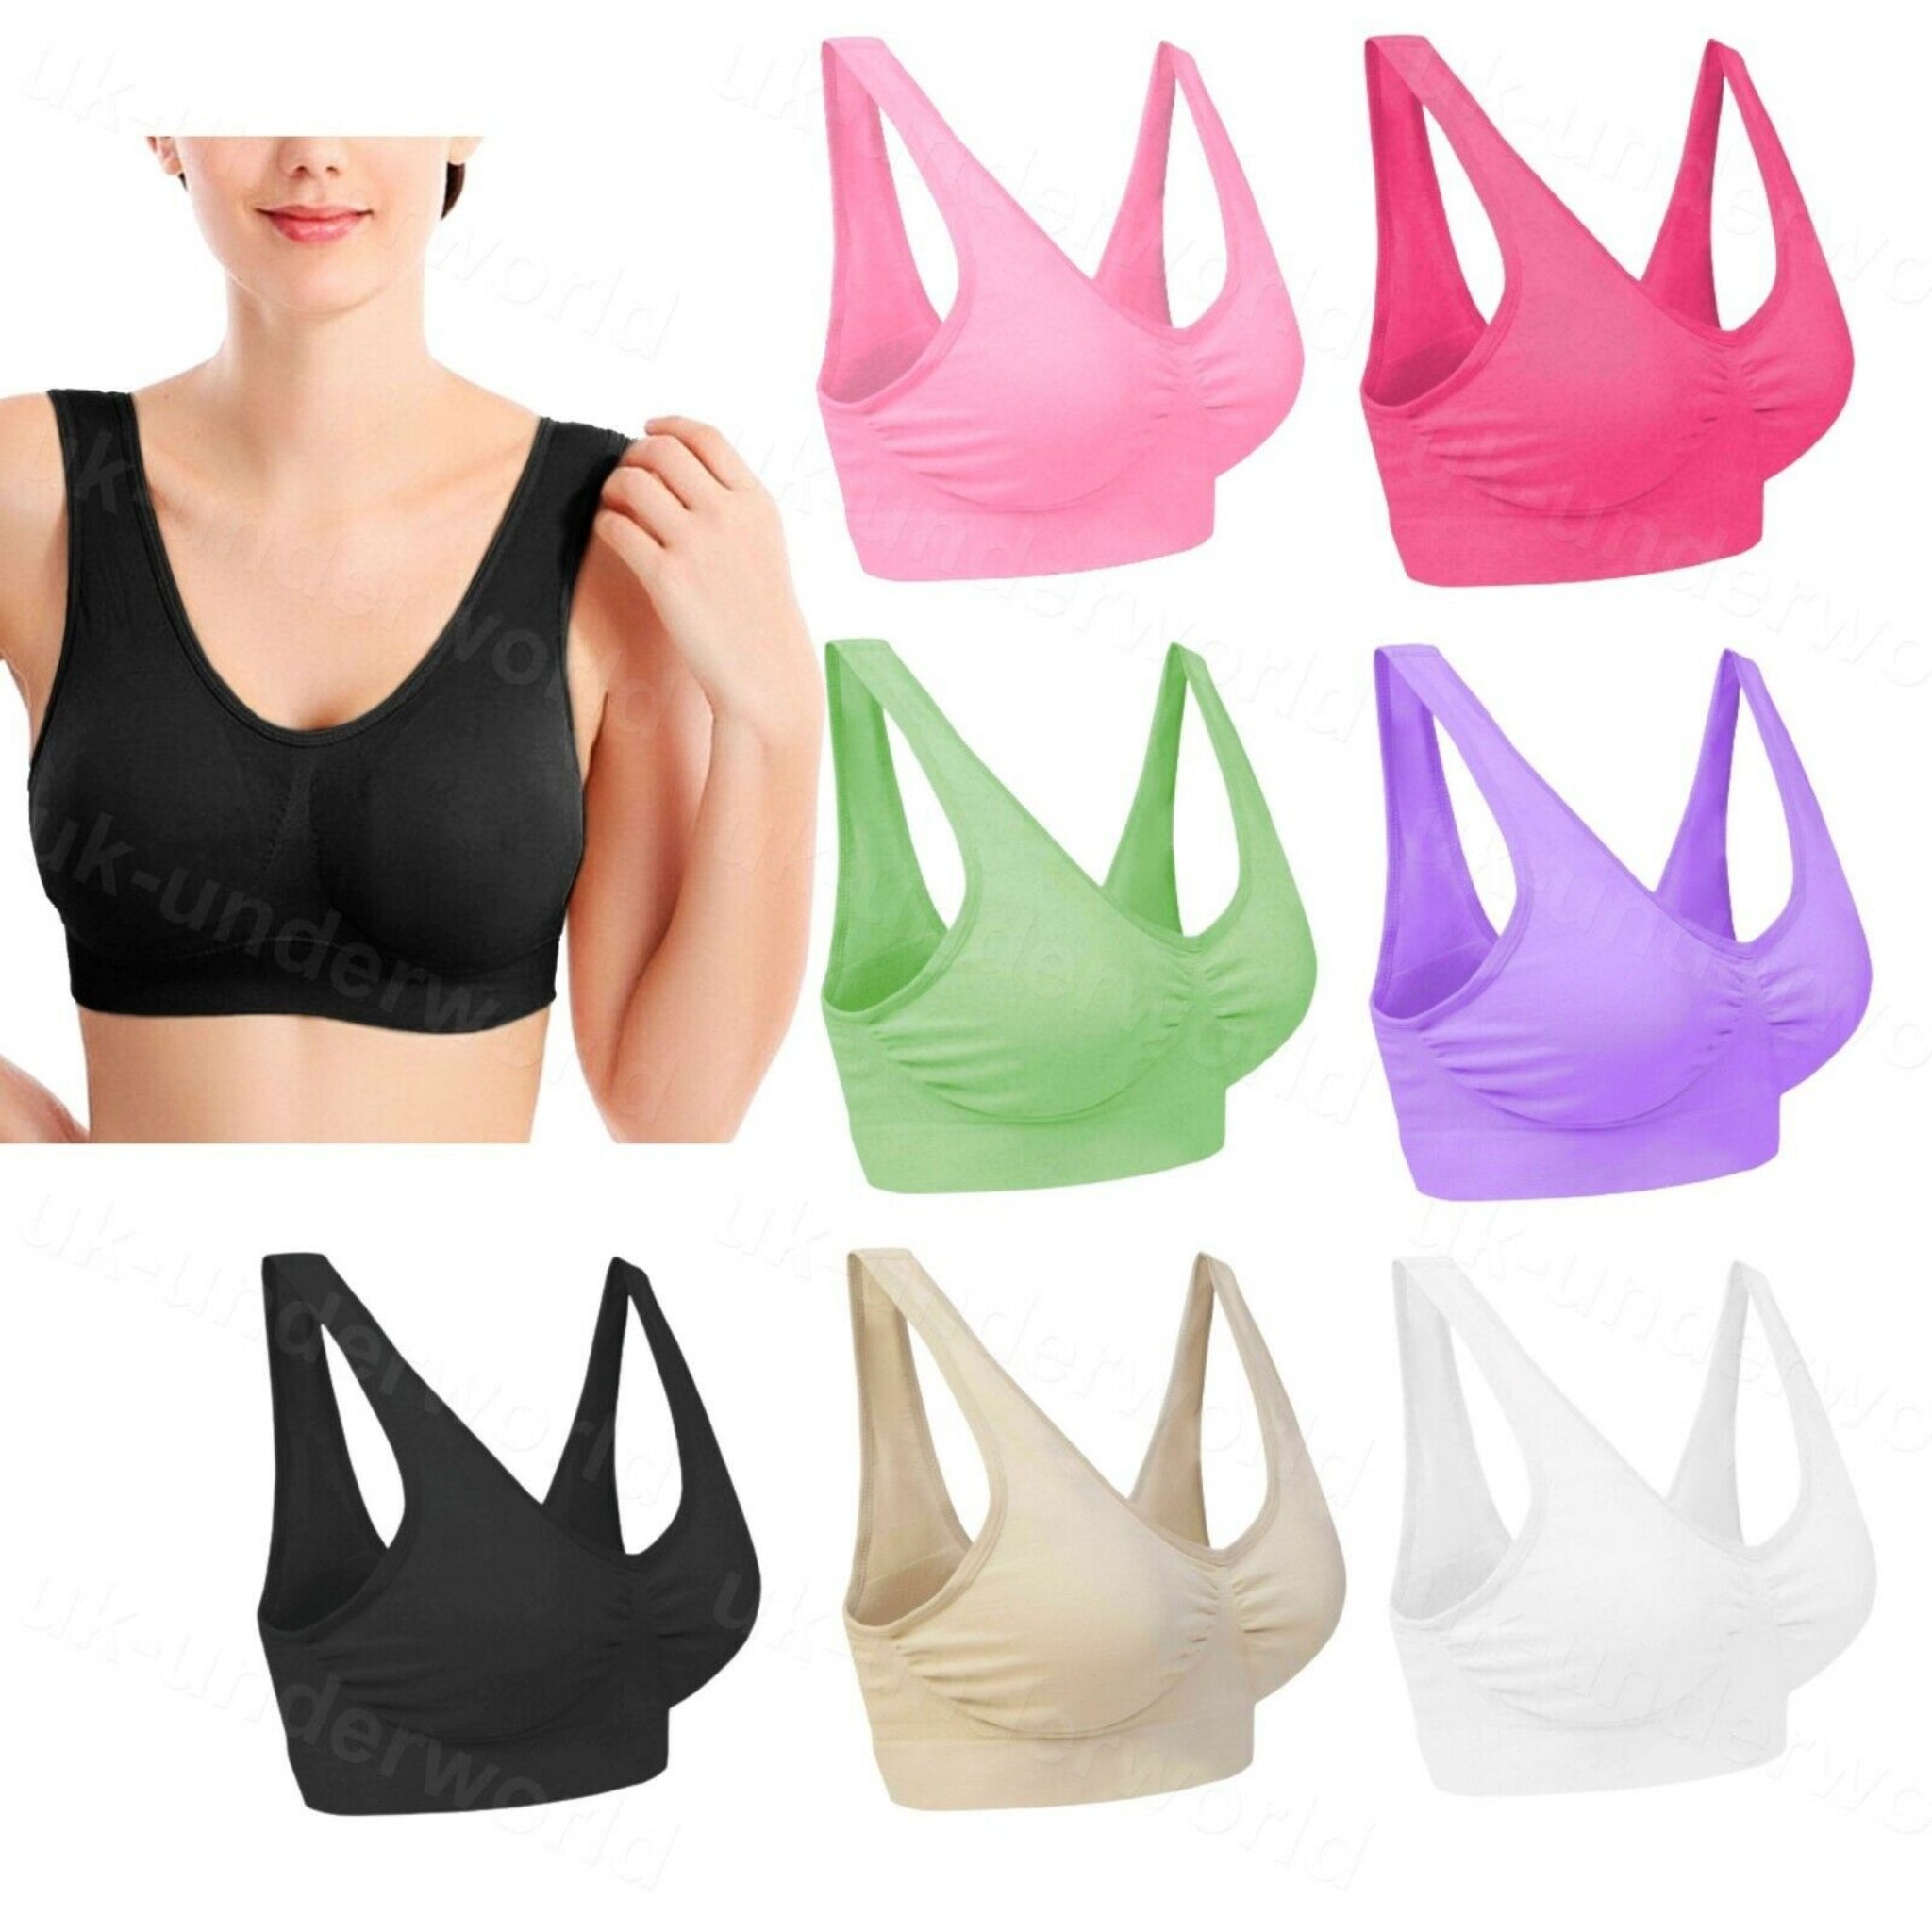 Beclen Harp Women/Ladies Seamless Padded Sports Shape Wear Yoga Bra For Adults-Perfect Christmas/Xmas Gift